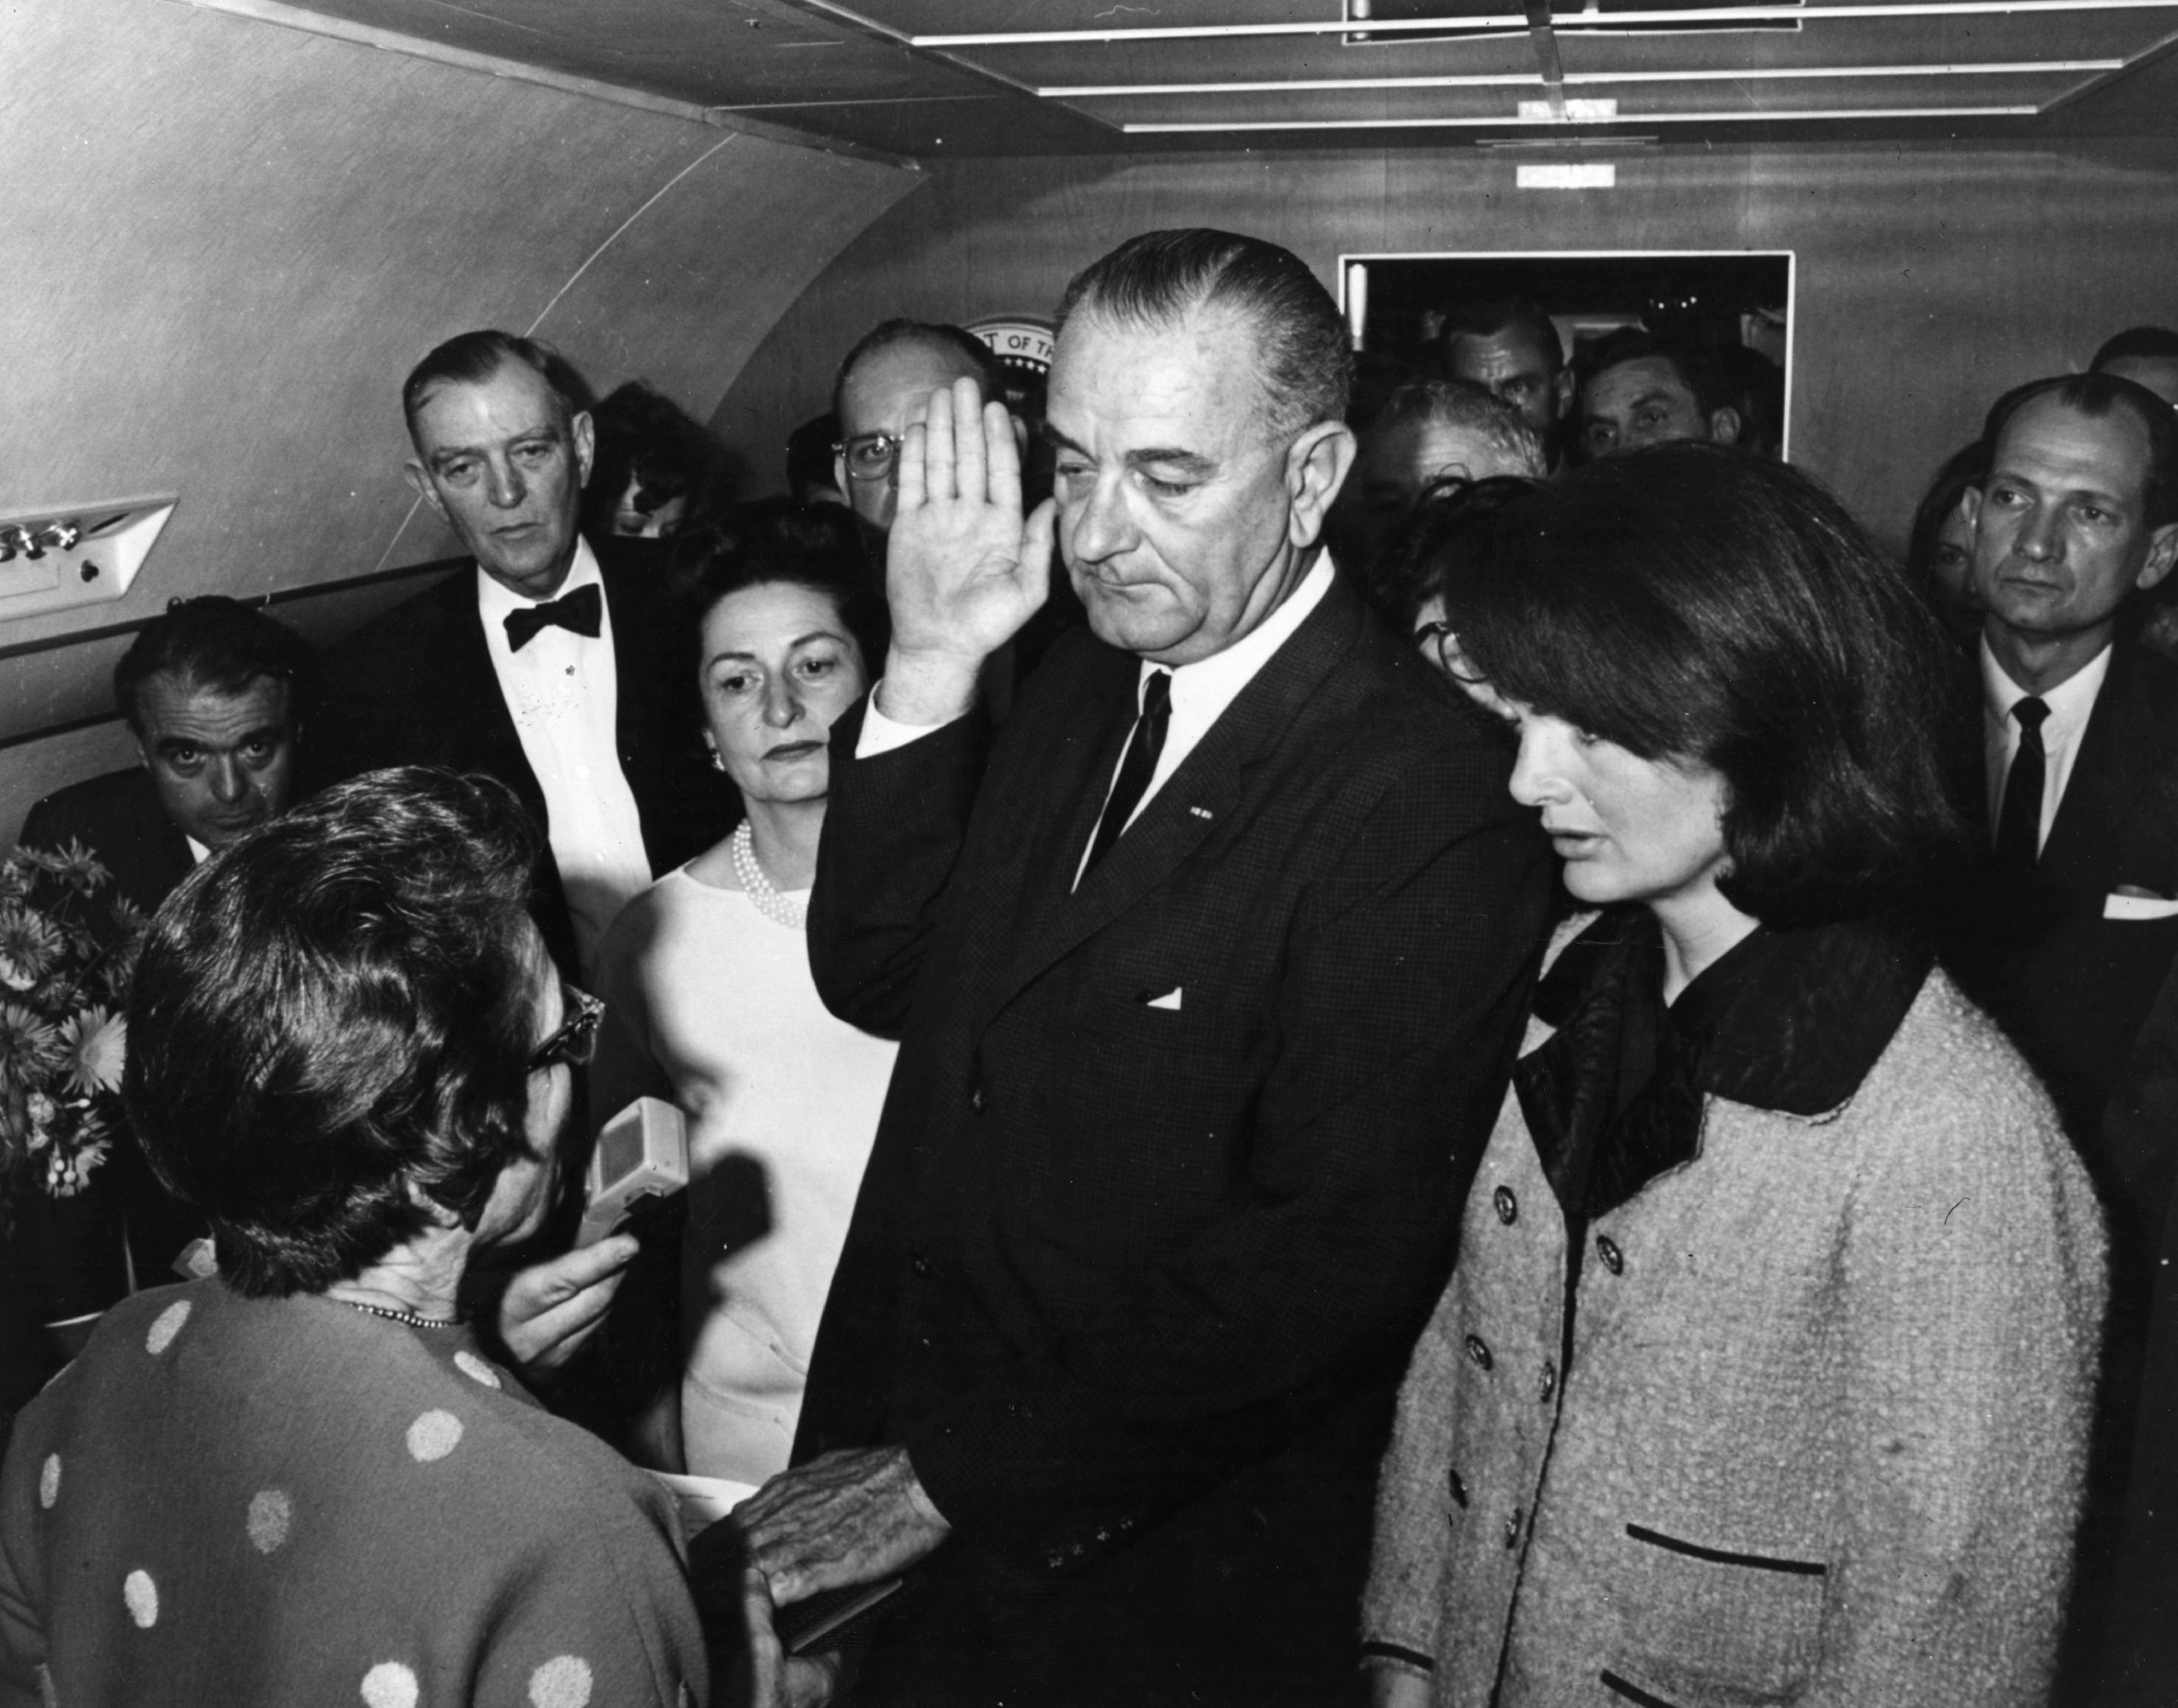 Lyndon Johnson, Air Force One - Former army photographer Cecil Stoughton, the first person to hold the post of White House photographer, took this historic photo of Judge Sarah Hughes administering the oath of office to a solemn Lyndon Johnson mere hours after President John F. Kennedy was assassinated on November 22, 1963. Johnson is surrounded by a group of staffers, as well as his wife and a bewildered-looking Jaqueline Kennedy, who is still wearing the pink Chanel suit she had on when her husband was shot. The only photographer on the plane when Johnson was inaugurated, Stoughton’s camera initially malfunctioned and it appeared there wouldn’t be any photographic record of the event. Thankfully, he quickly fixed the problem and was able to document it.